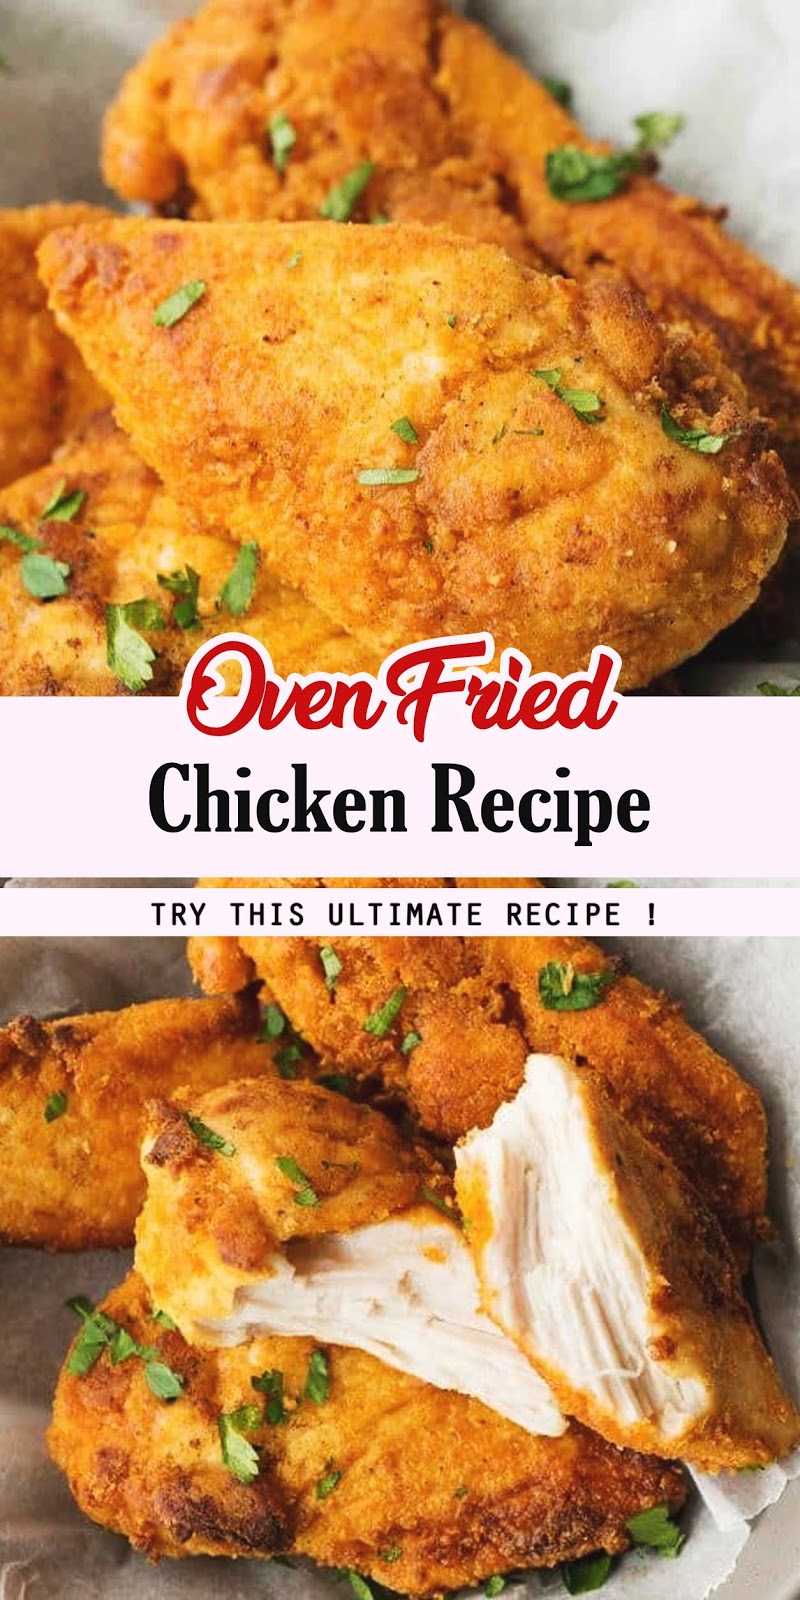 THE BEST OVEN FRIED CHICKEN RECIPE - RECIPE BEMBLOO